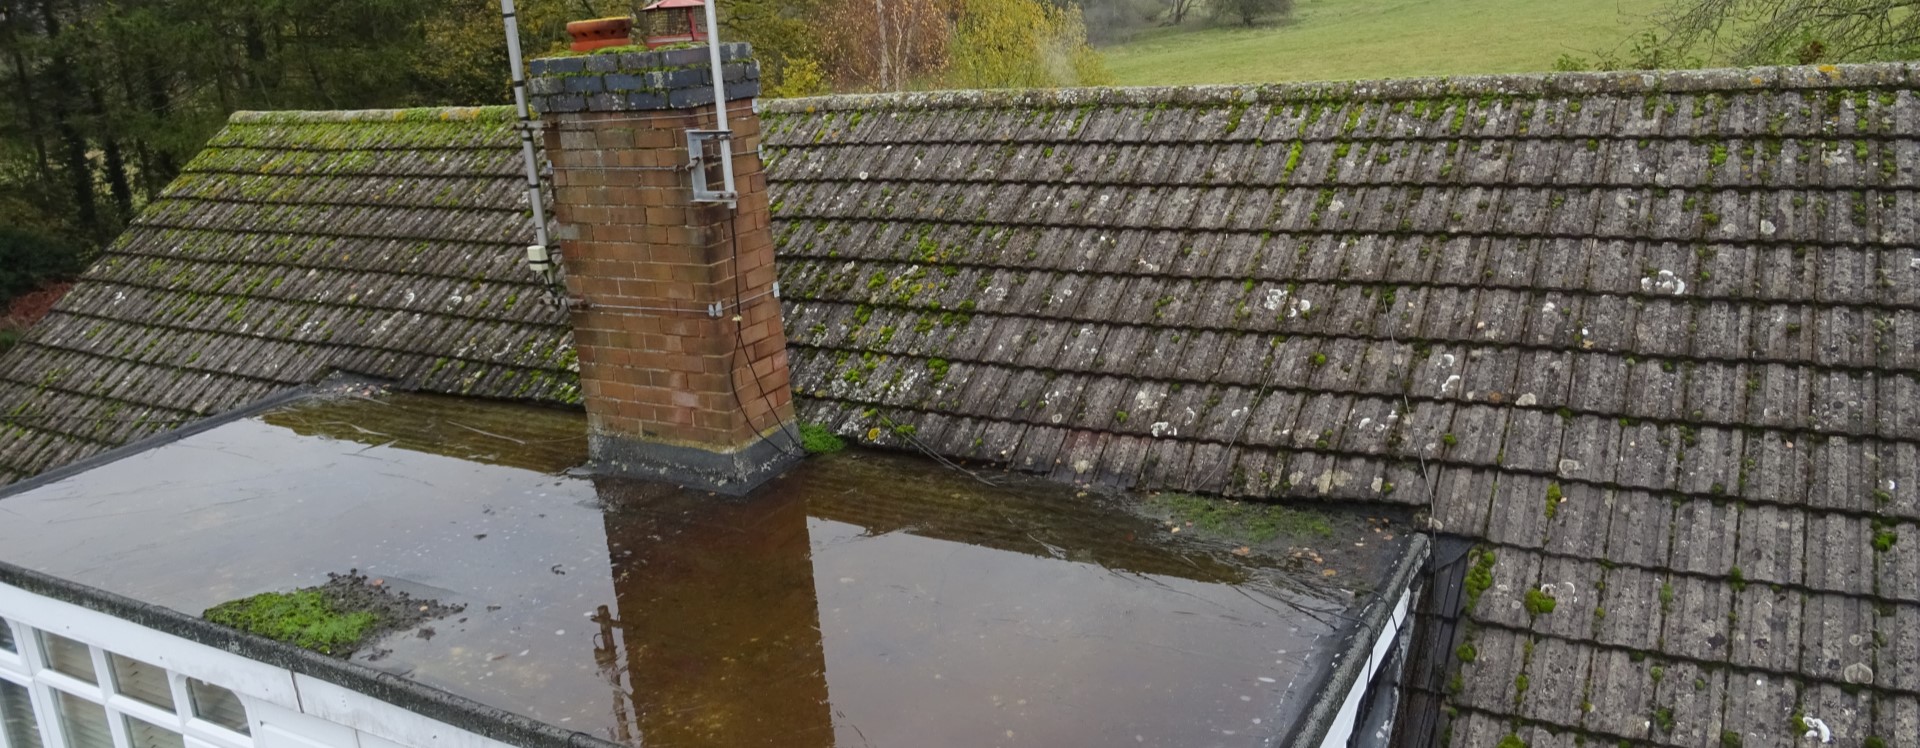 Pooled water on flat roof